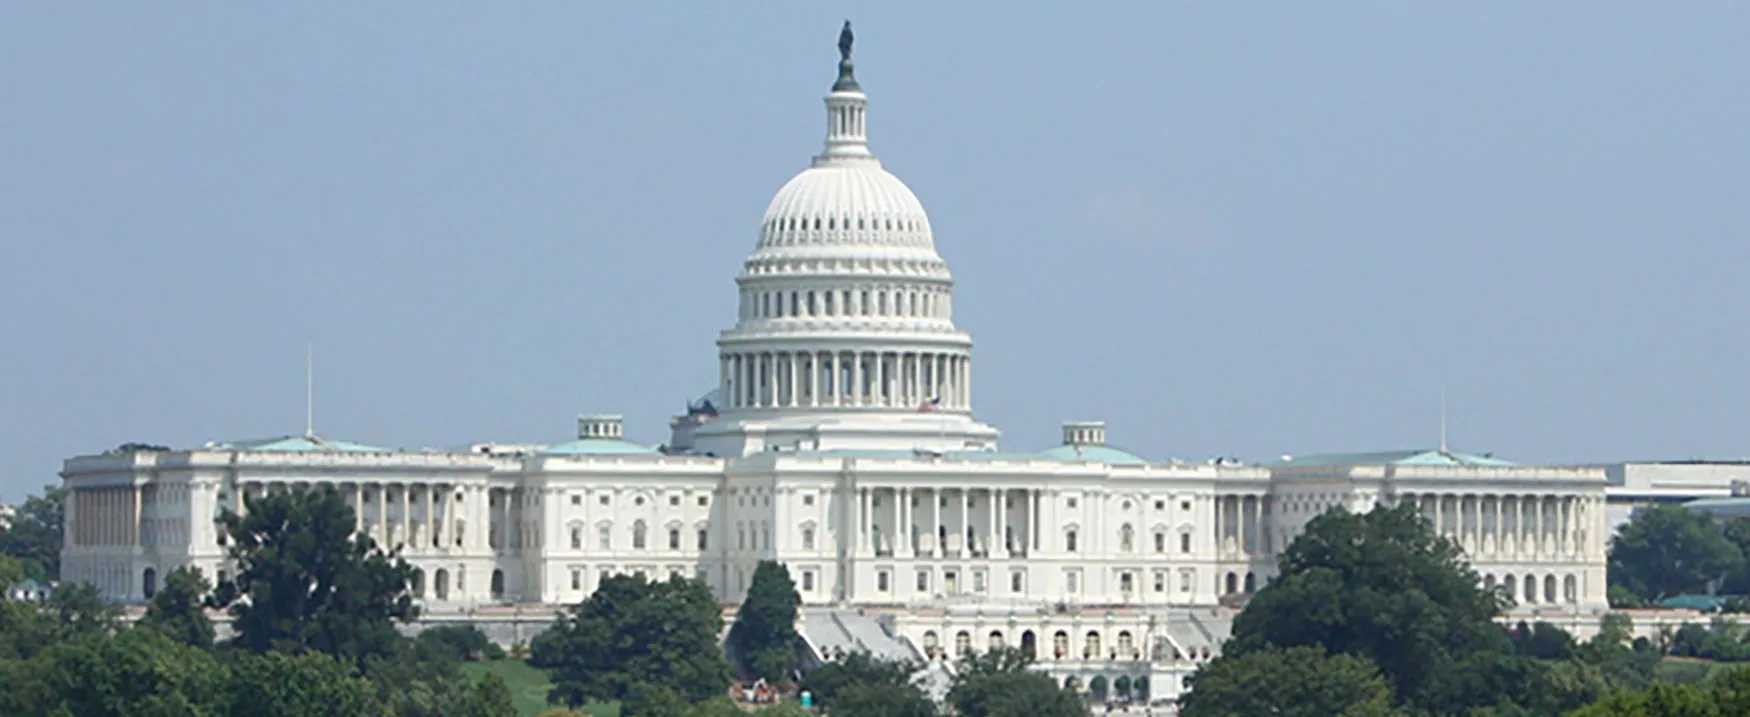 A picture of the United States Capitol Building.